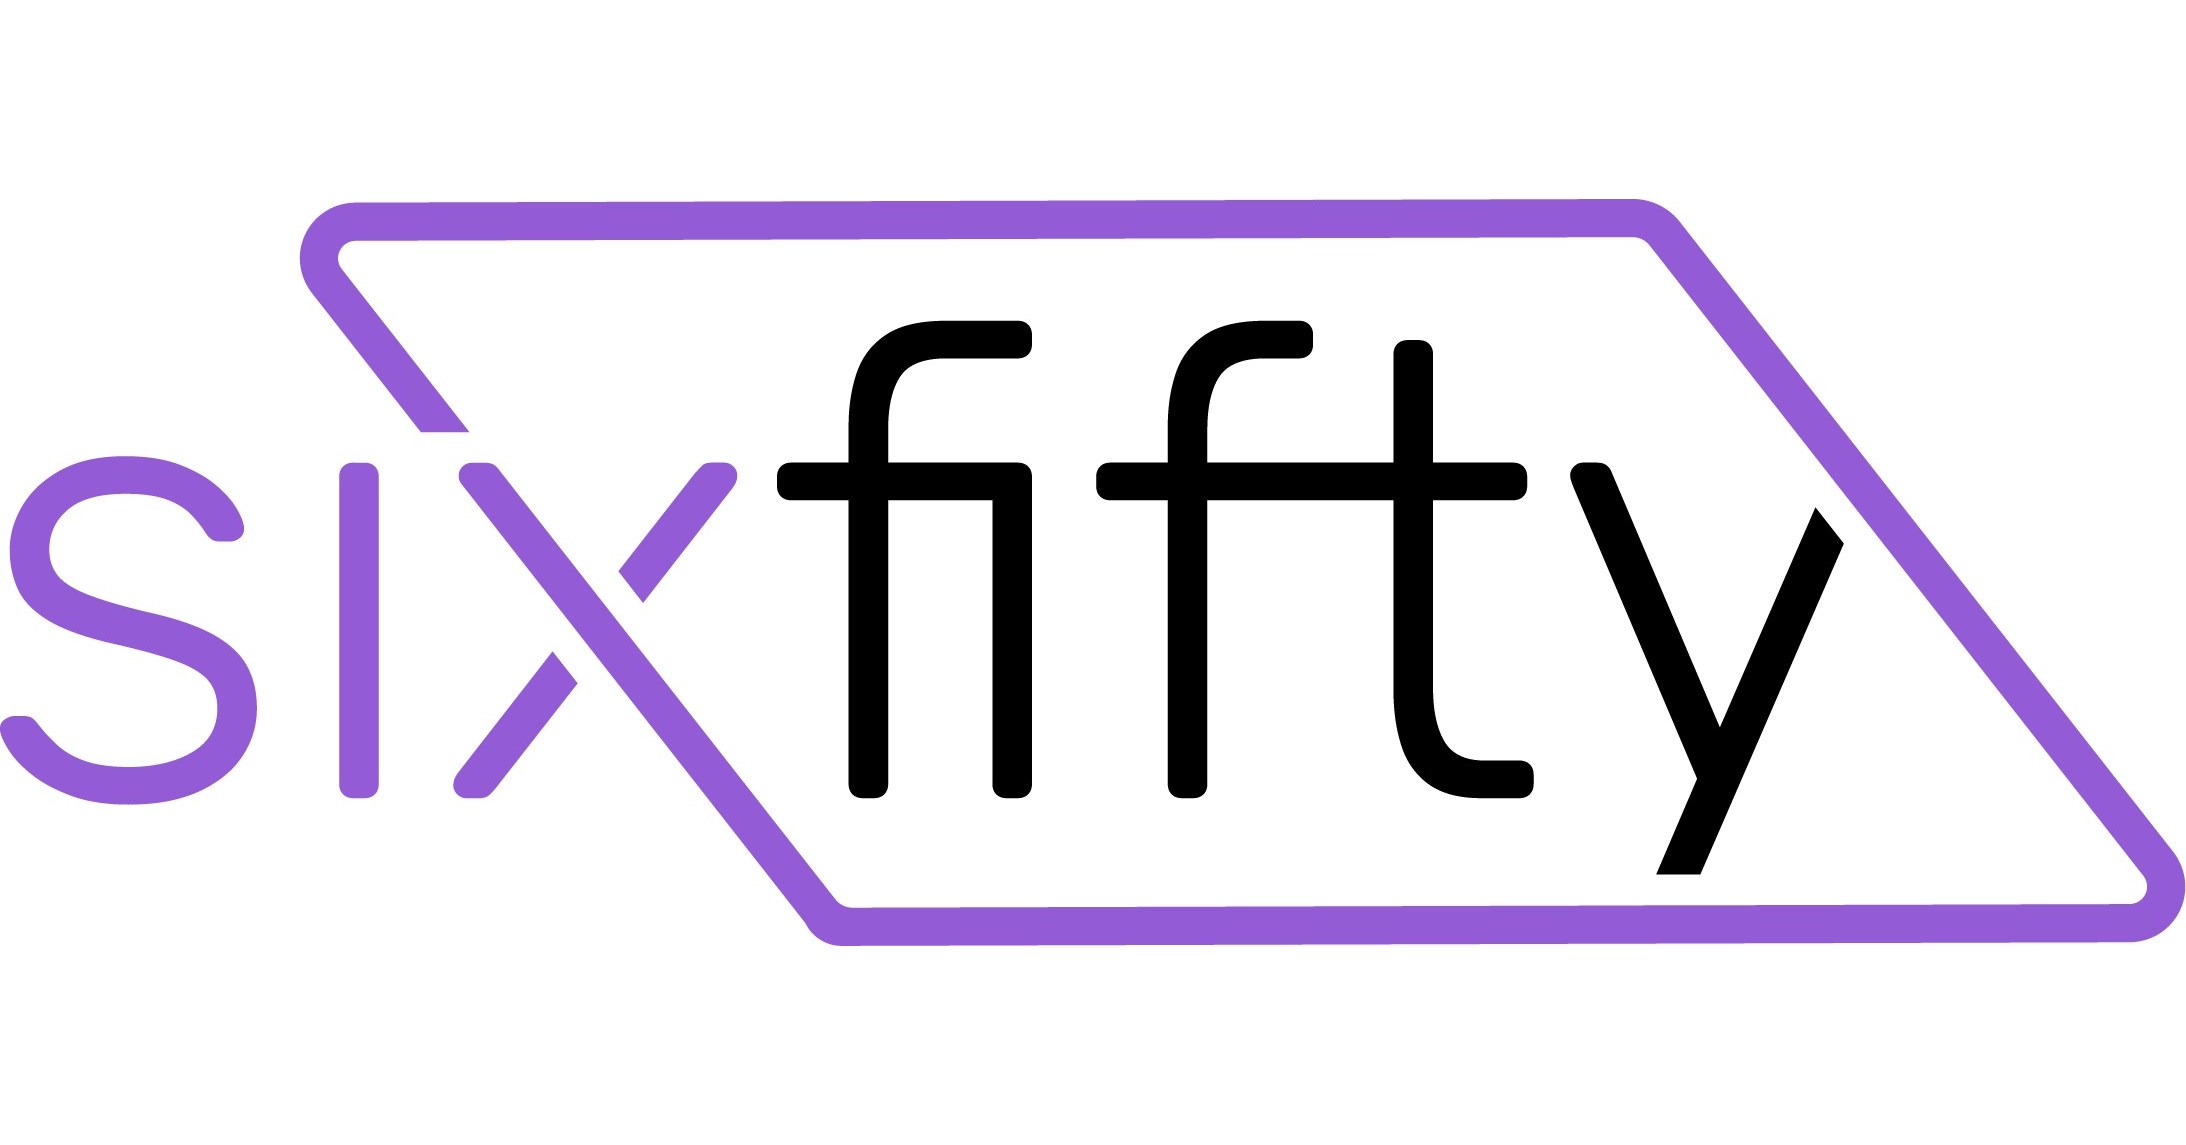 the six fifty logo is shown in purple.